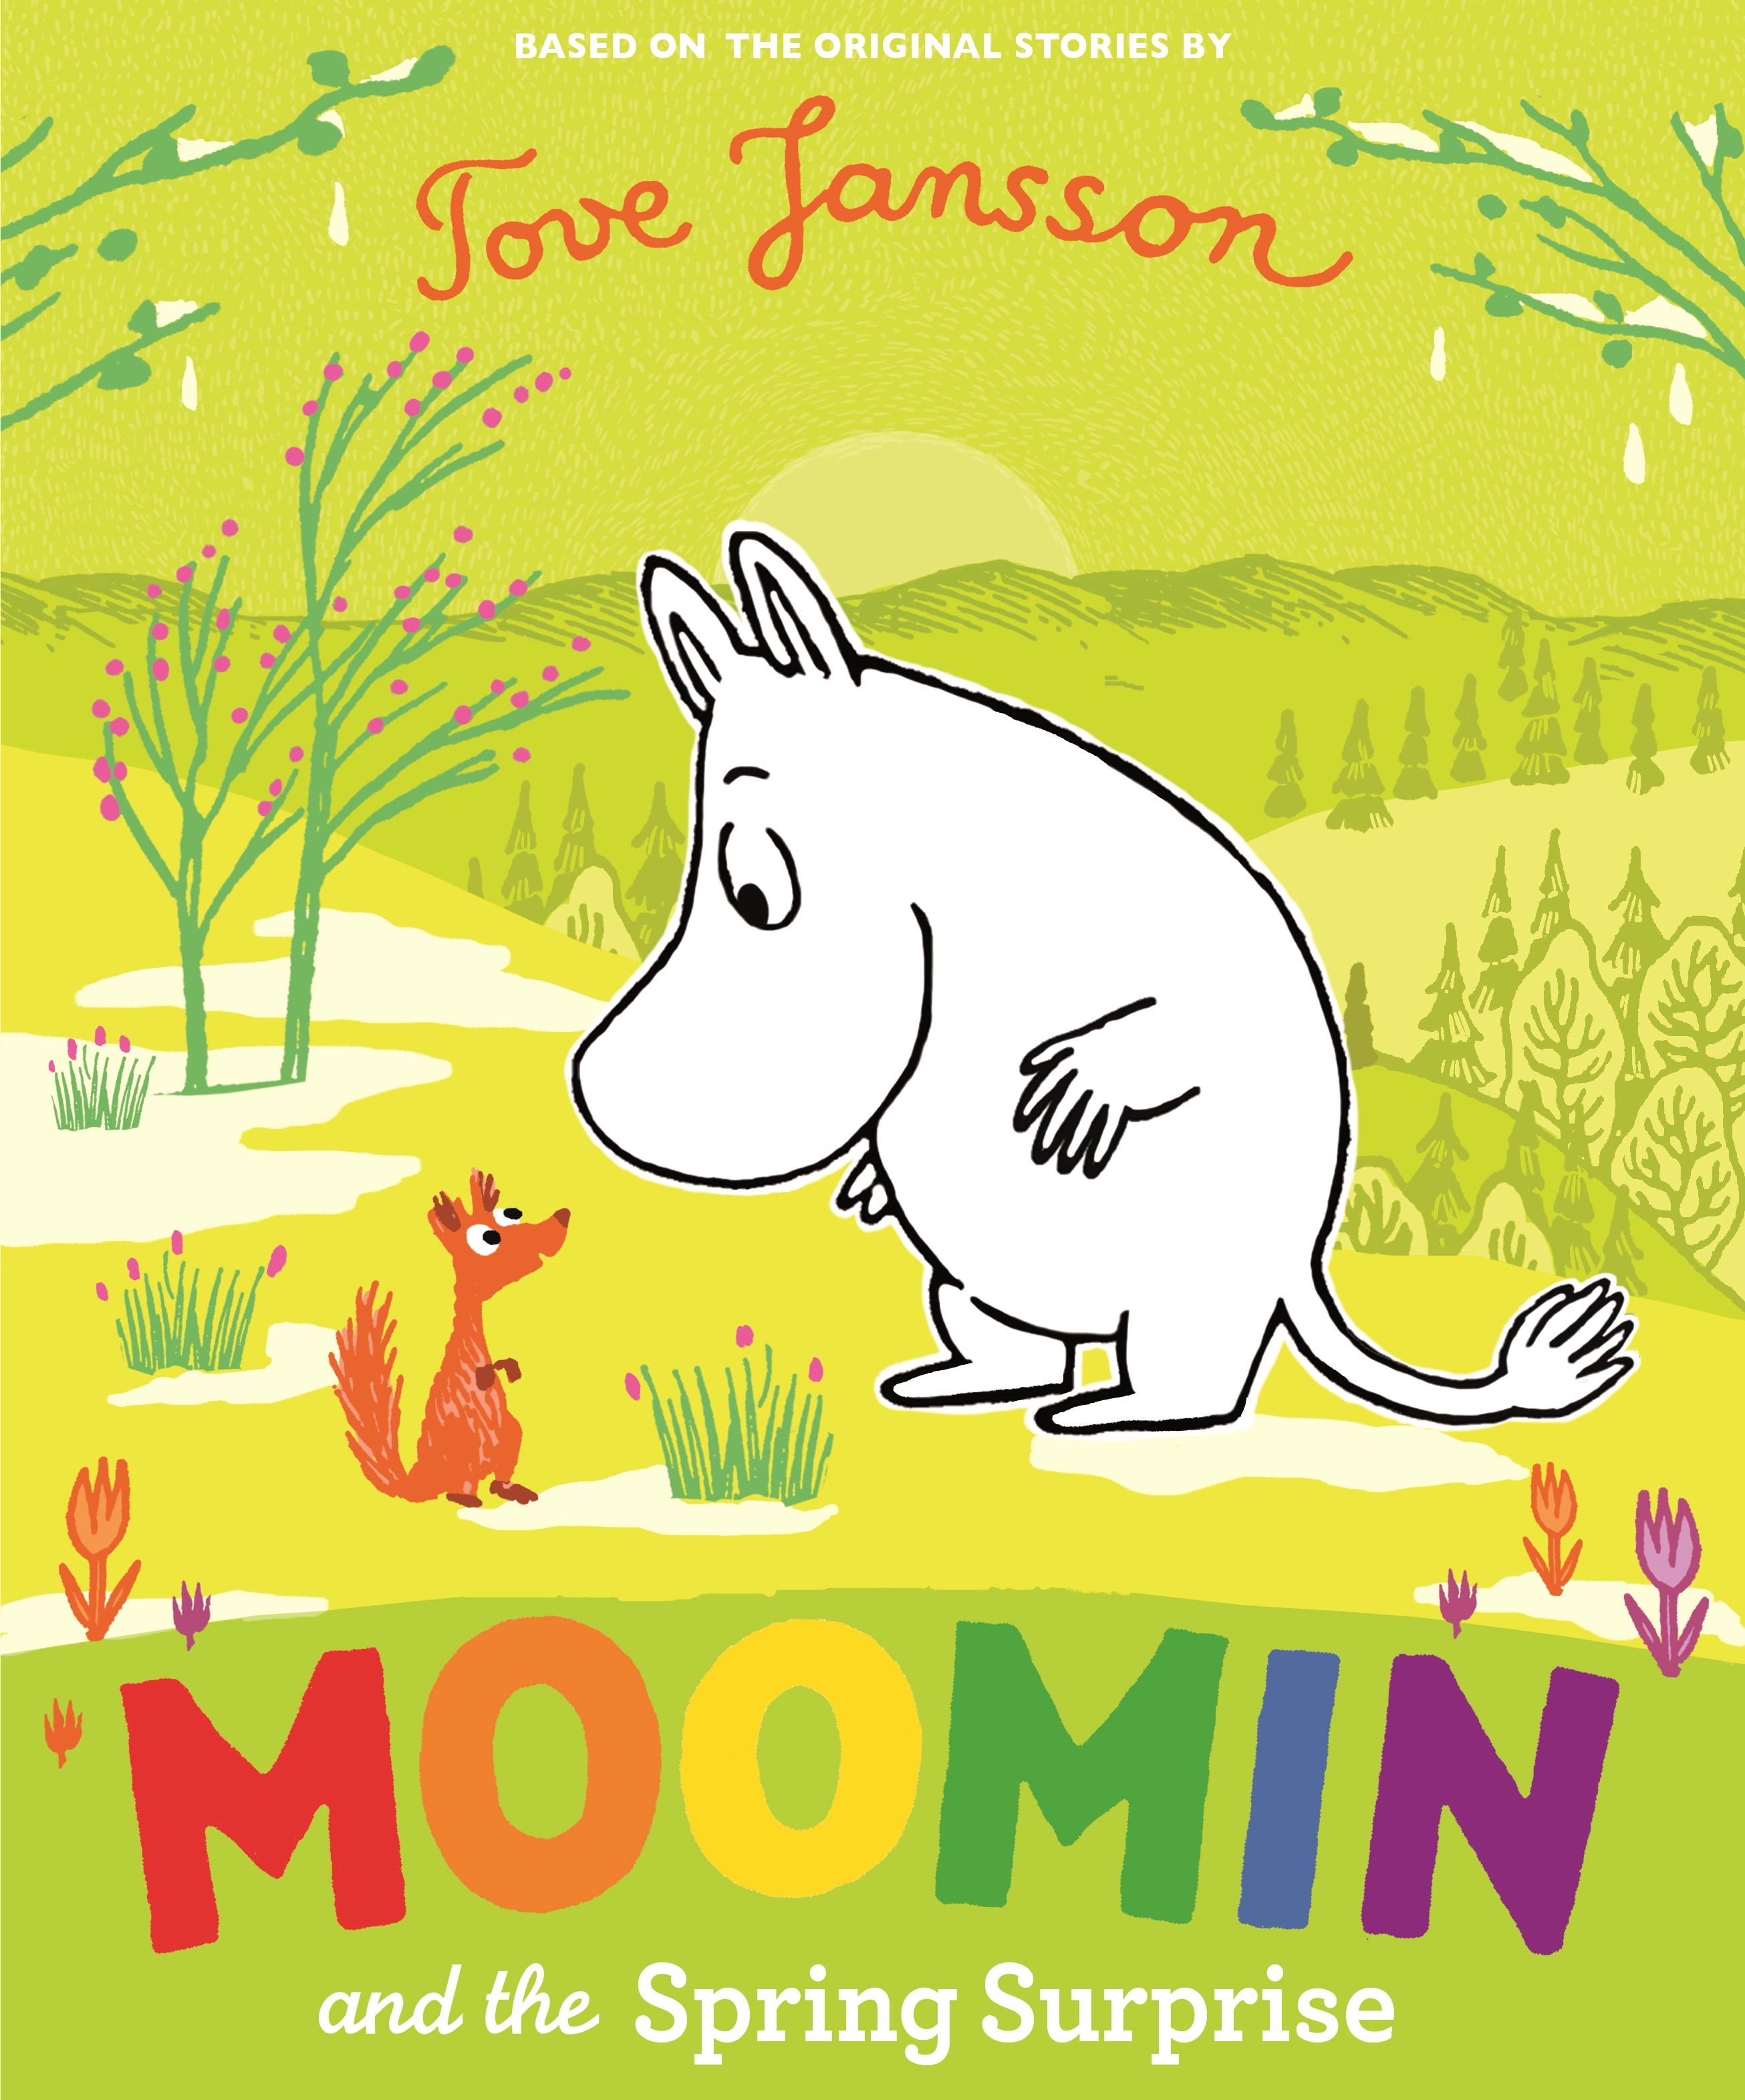 Книга «Moomin and the Spring Surprise» Tove Jansson — 21 мая 2020 г.